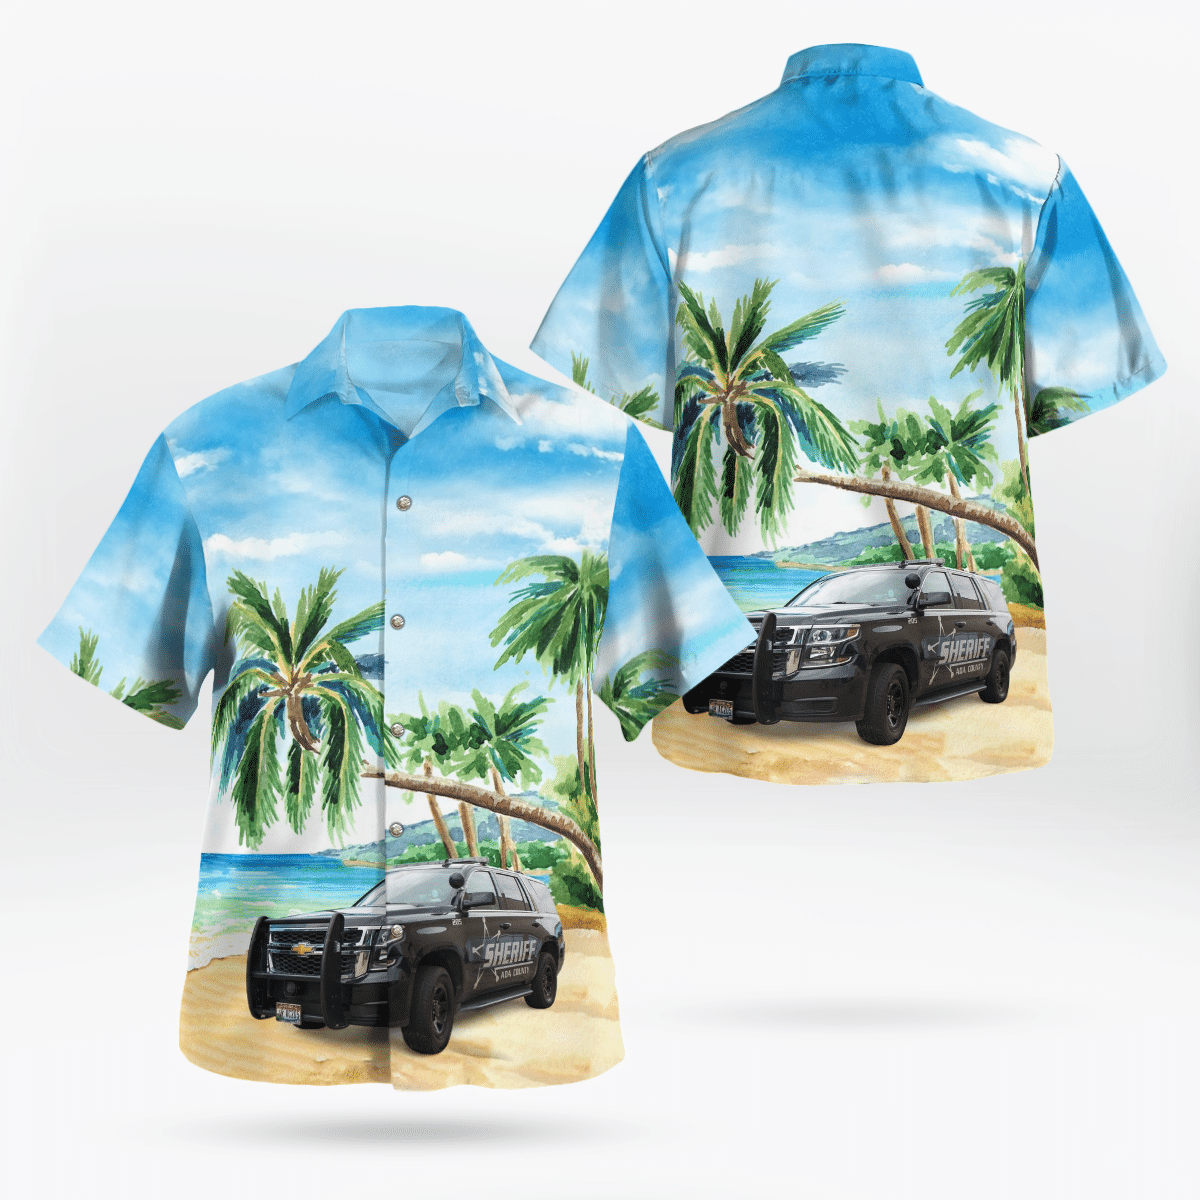 Some cool 3d hawaii shirt for this summer 90